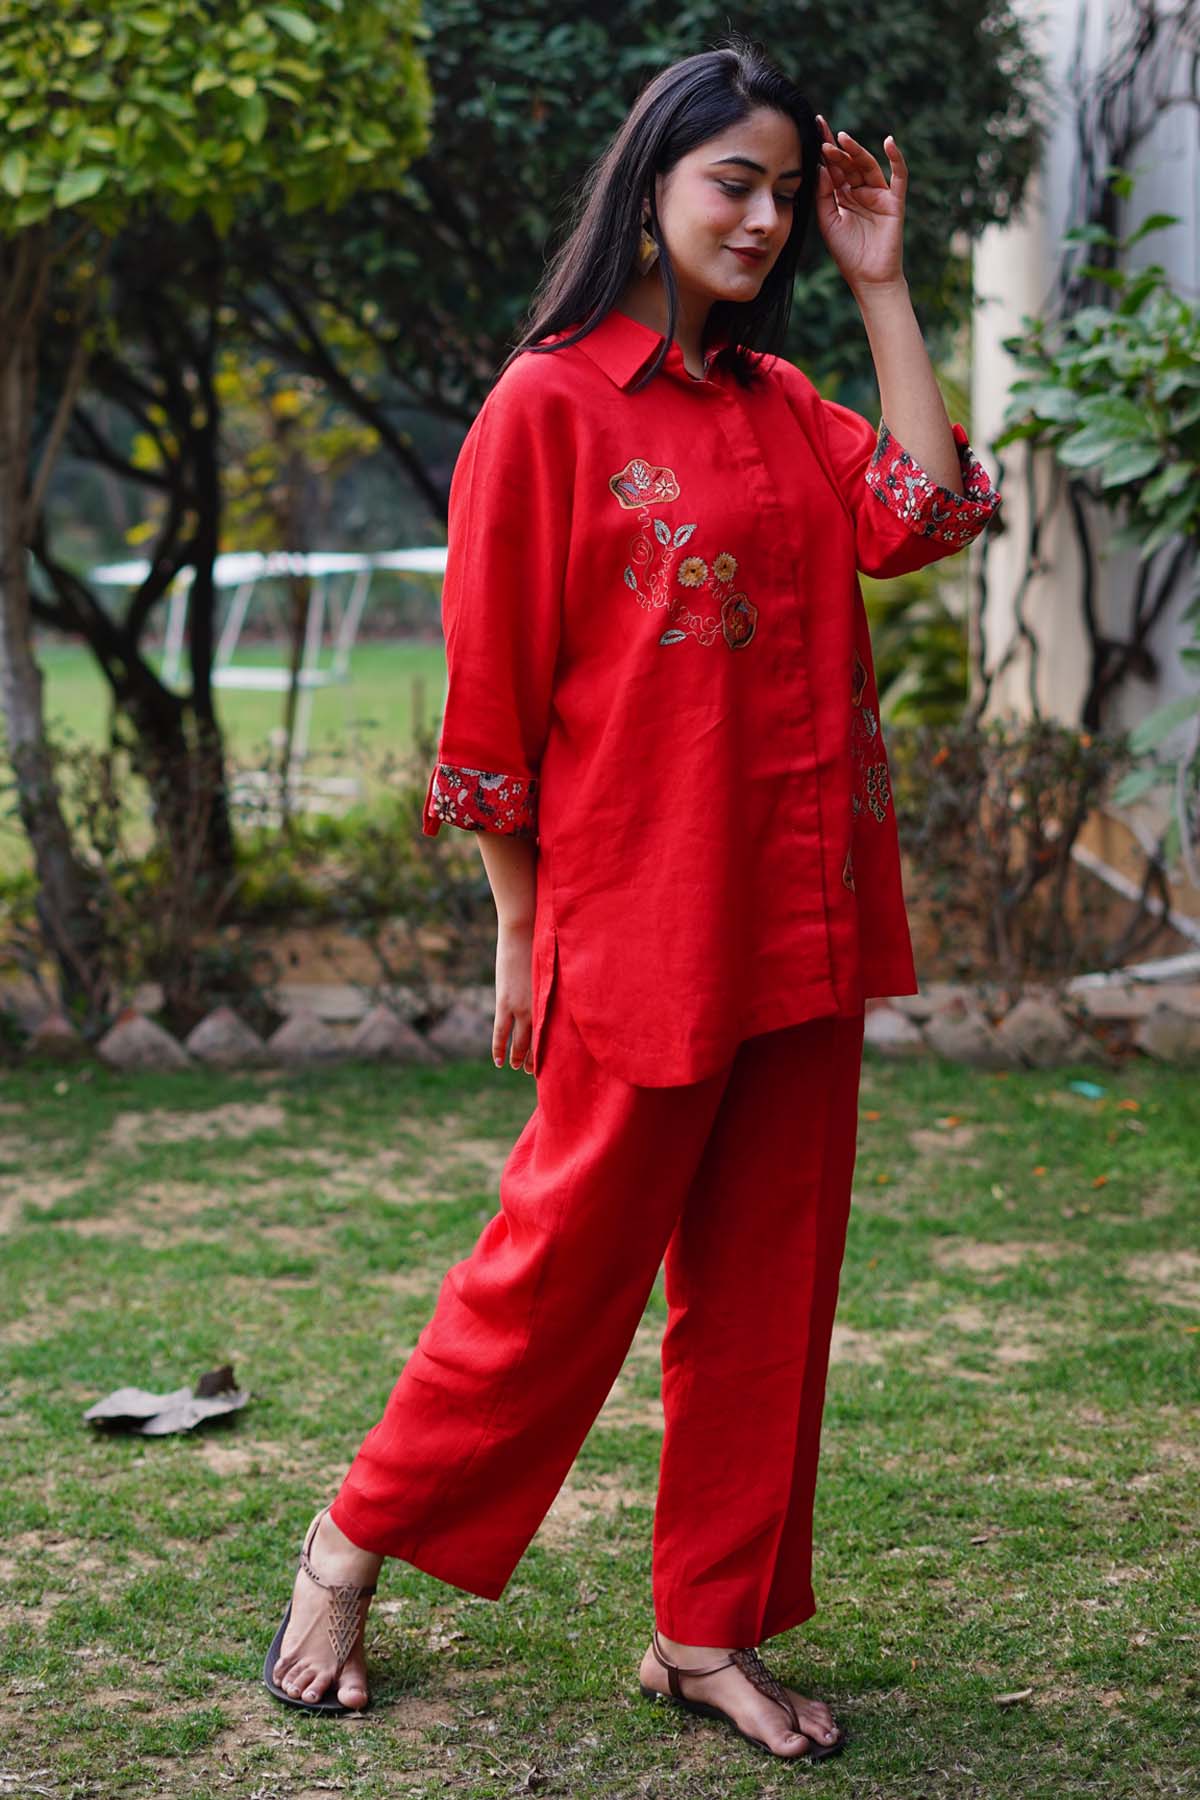 Designer Linen Bloom Red Linen Shirt with Delicate Embroidery For Women Online at ScrollnShops